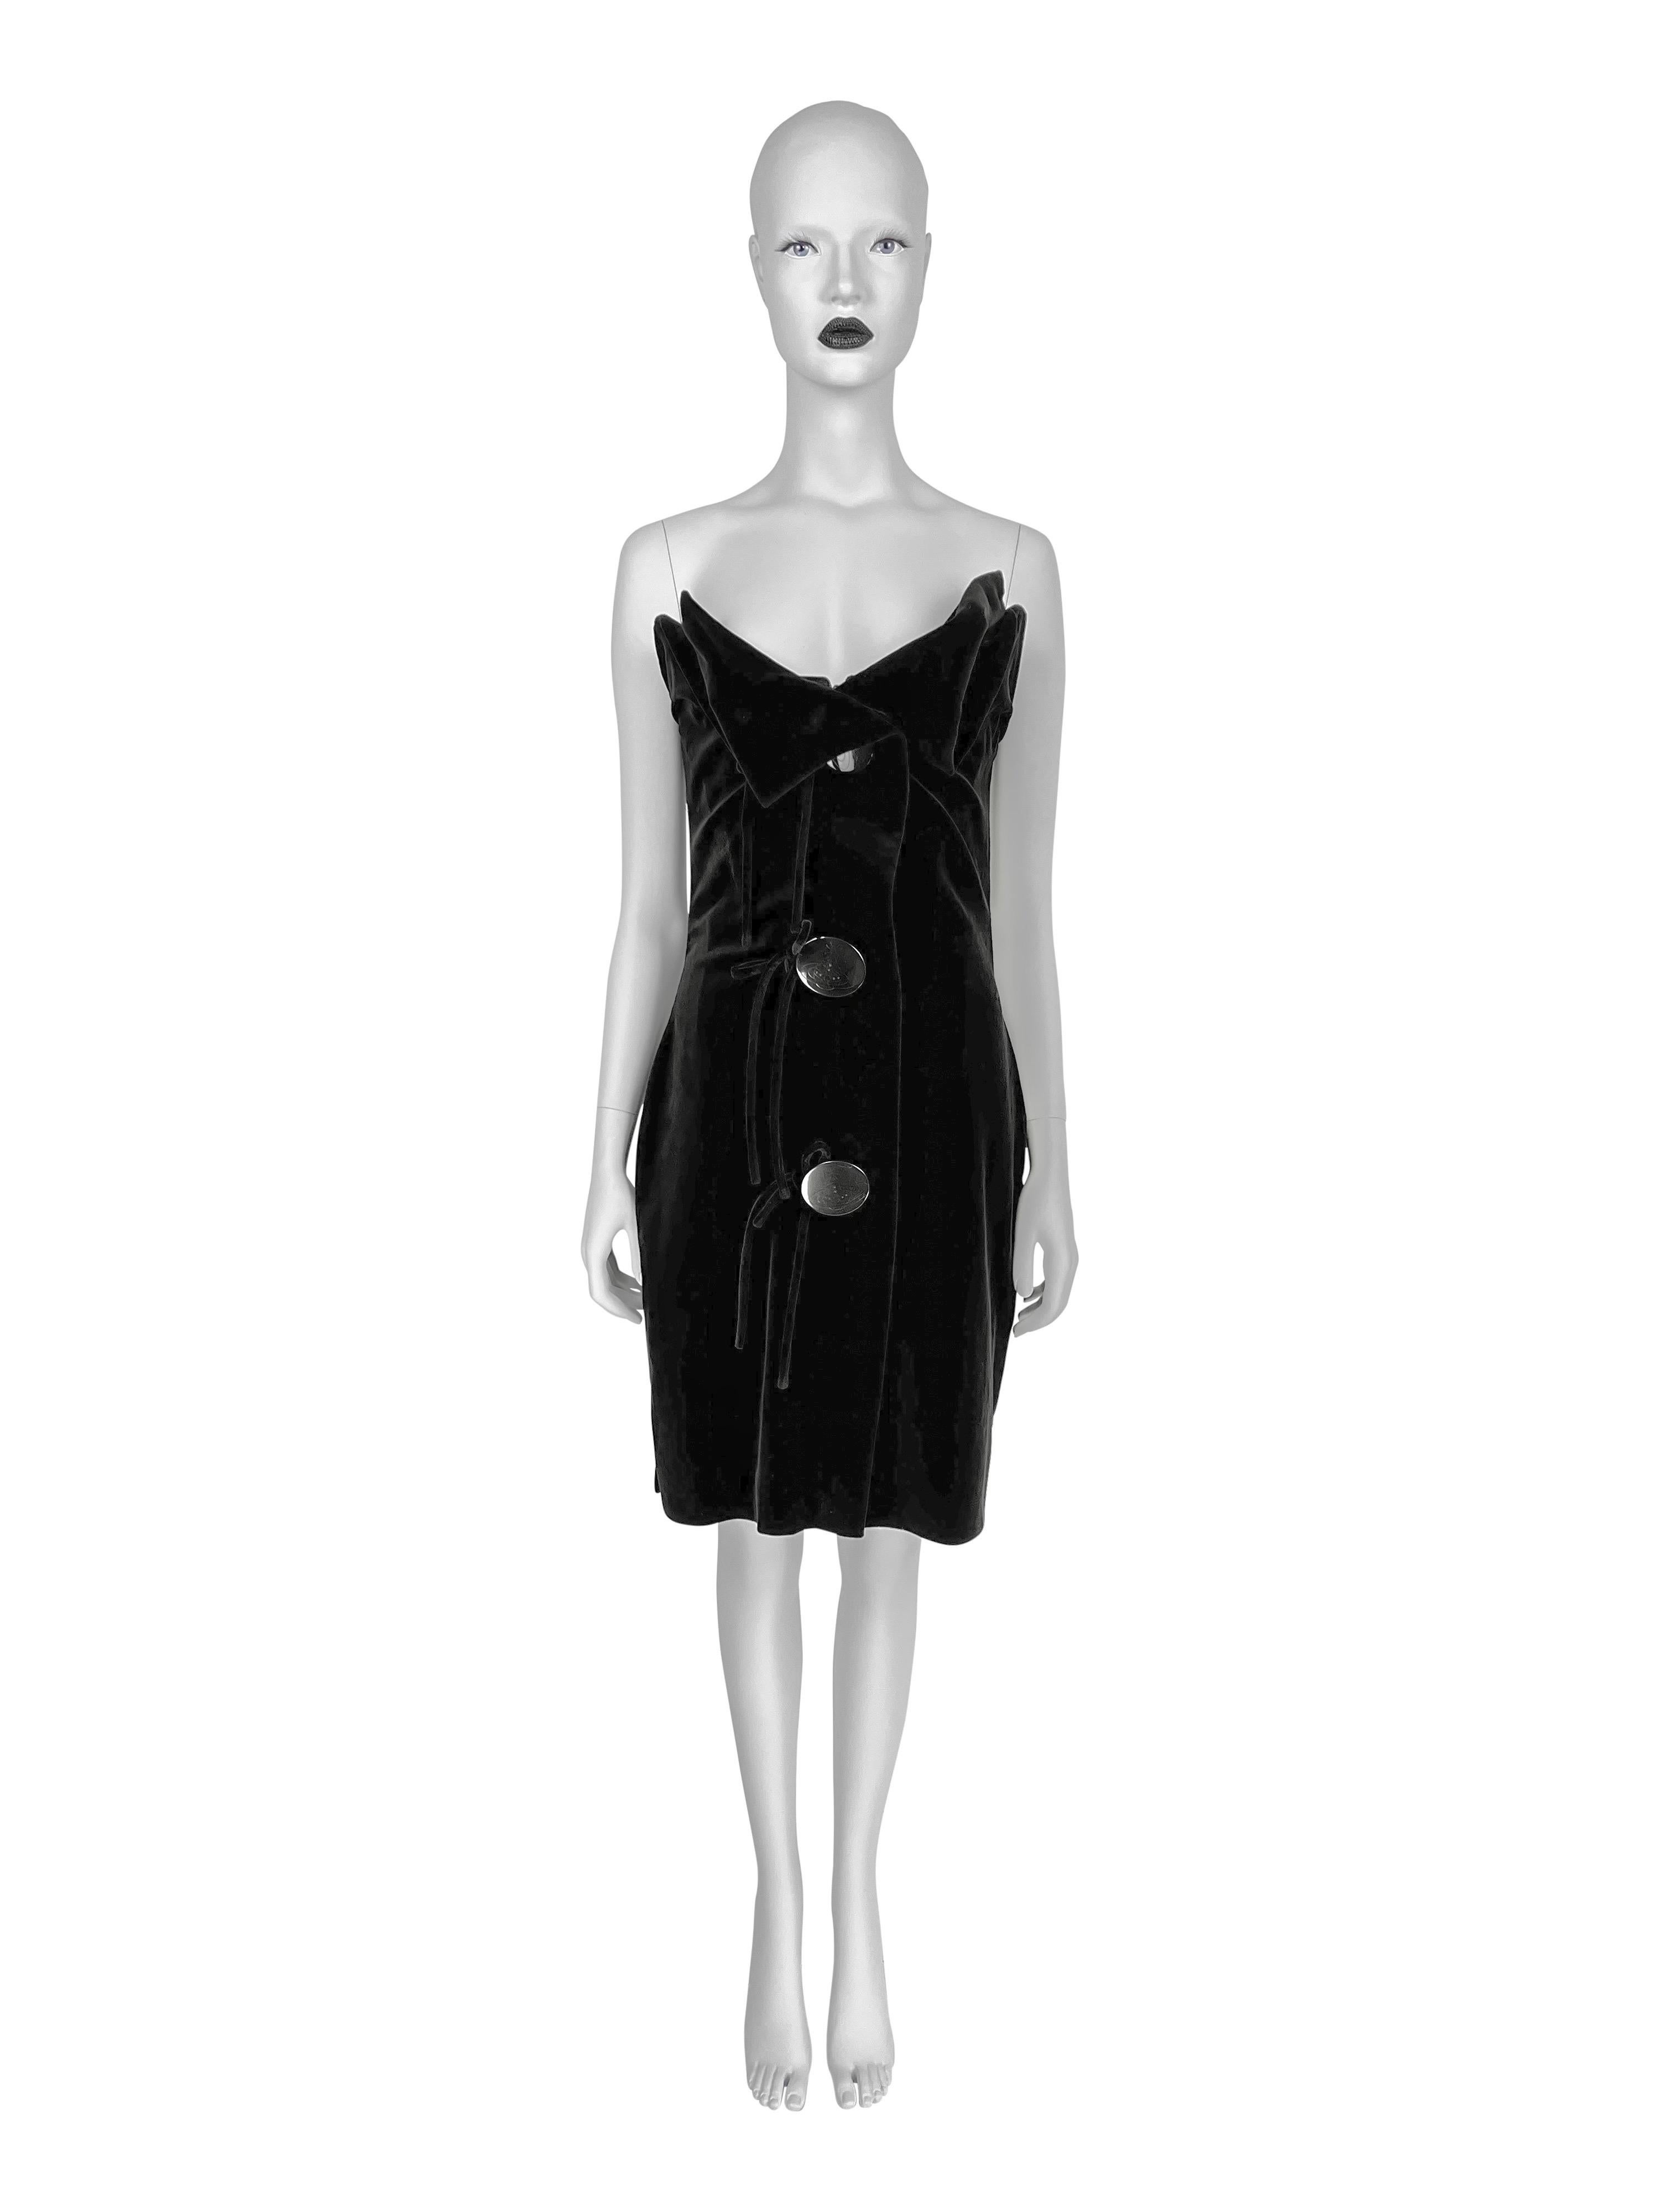 Fall 1998 Vivienne Westwood Corseted Velvet Dress In Good Condition For Sale In Prague, CZ